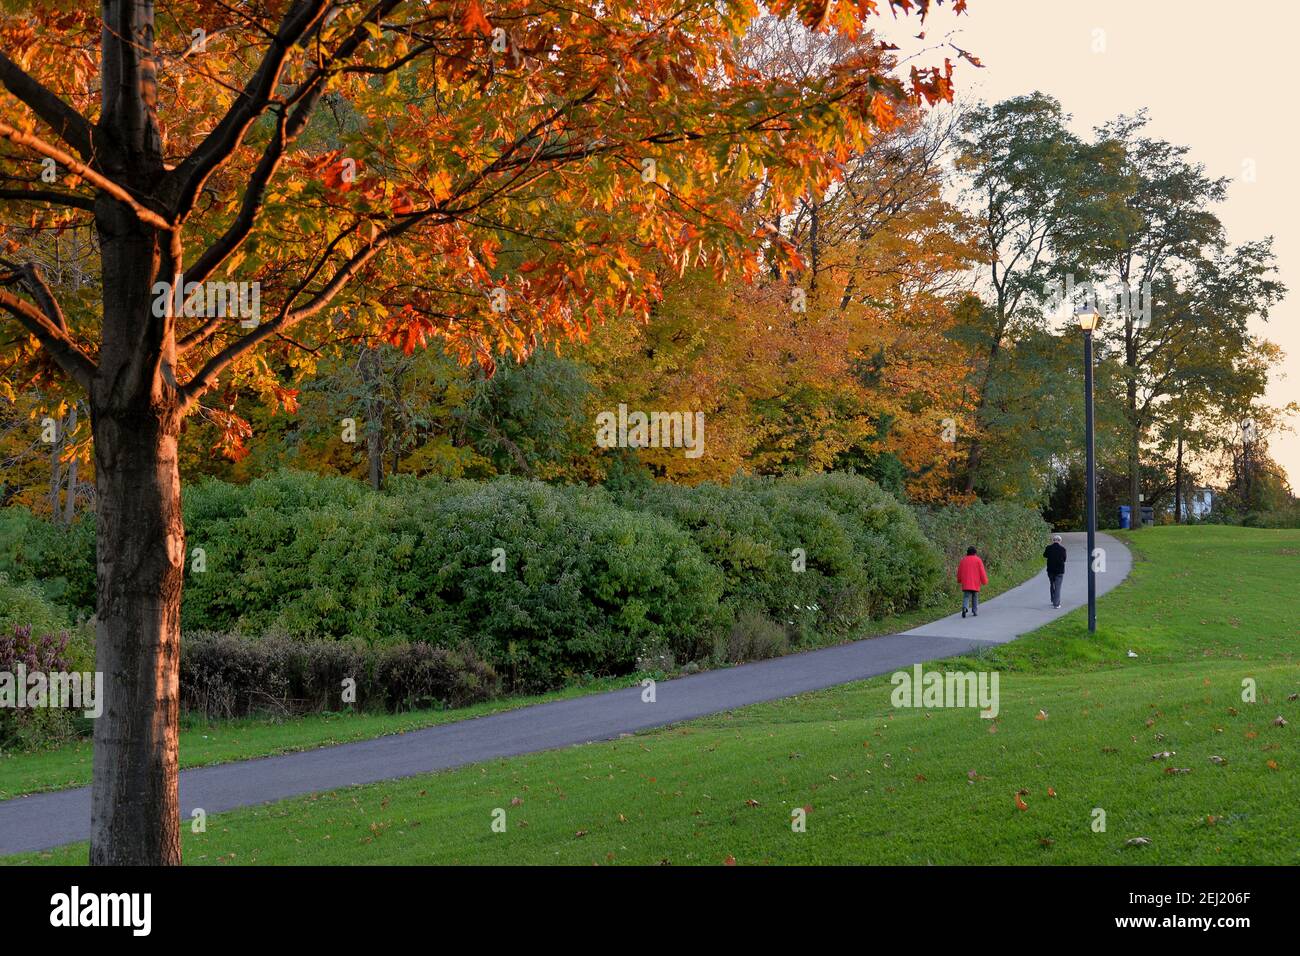 Walking in the public park in autumn at sunset - healthy lifestyle Stock Photo